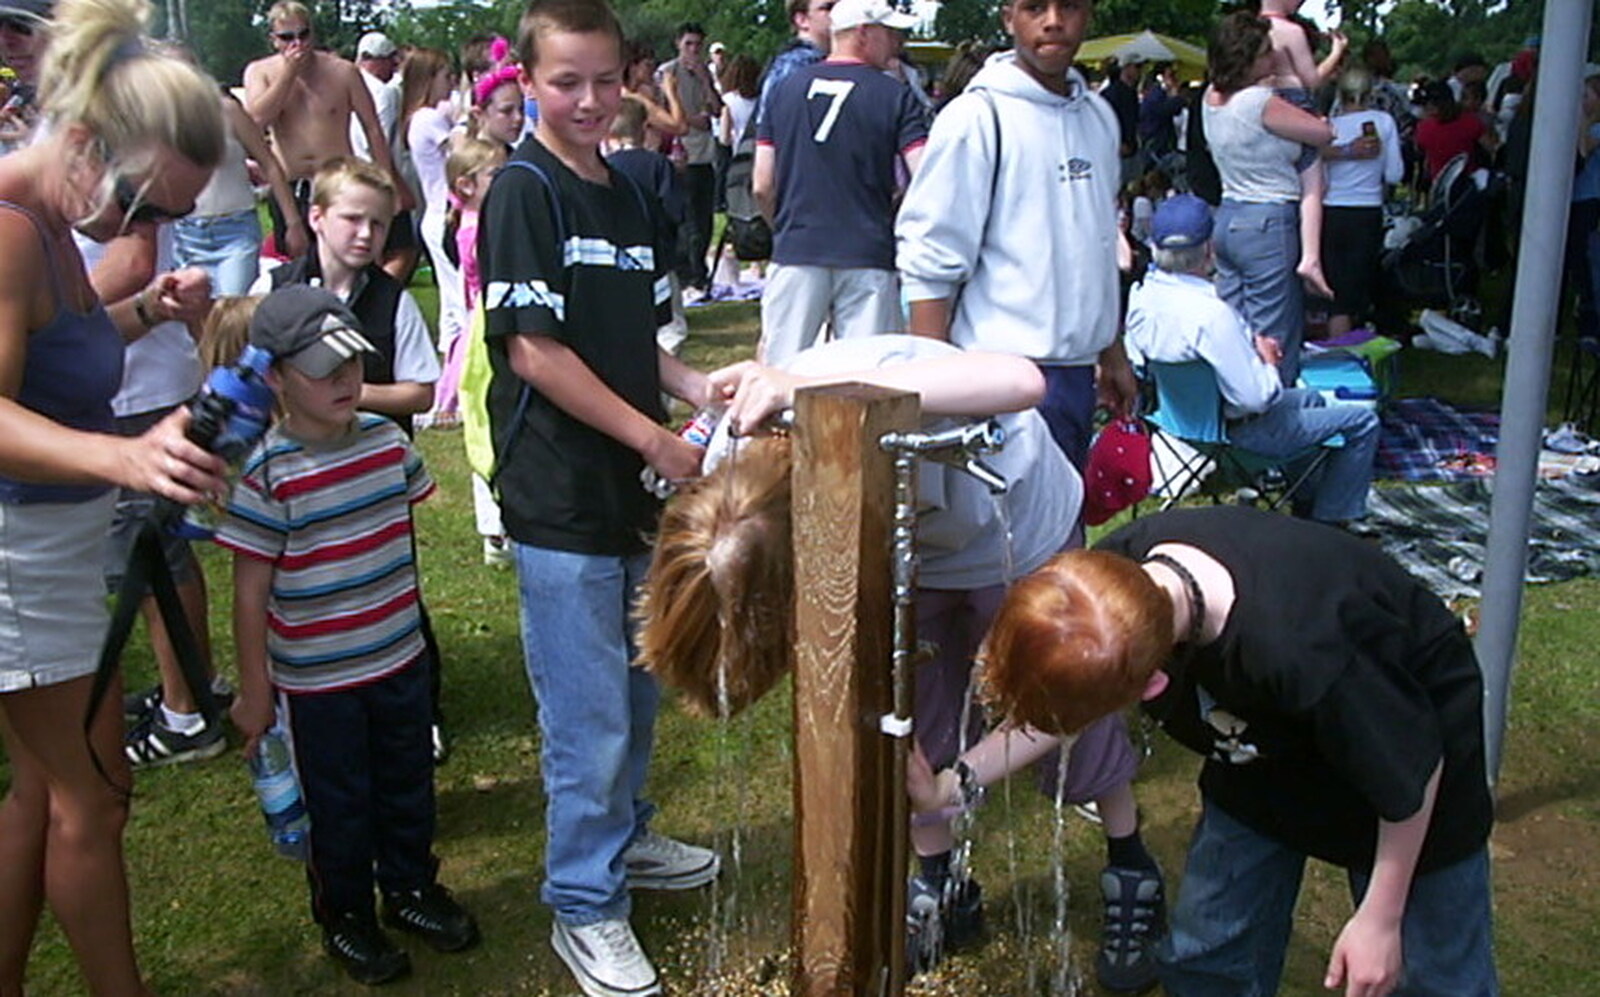 Some kids get a hair wash from Radio 1's One Big Sunday, Chantry Park, Ipswich - 14th July 2002